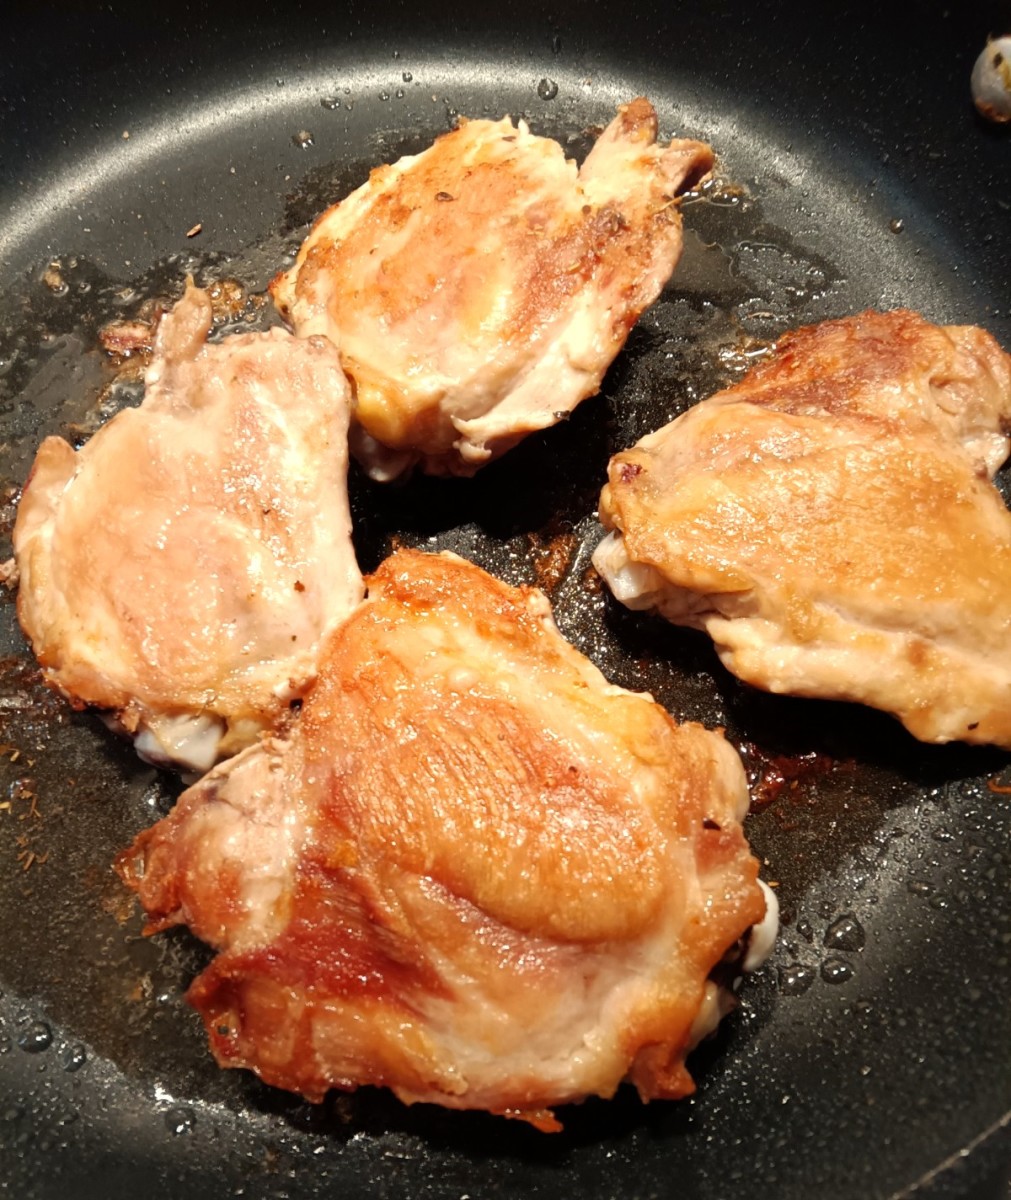 Richly browned chicken thighs